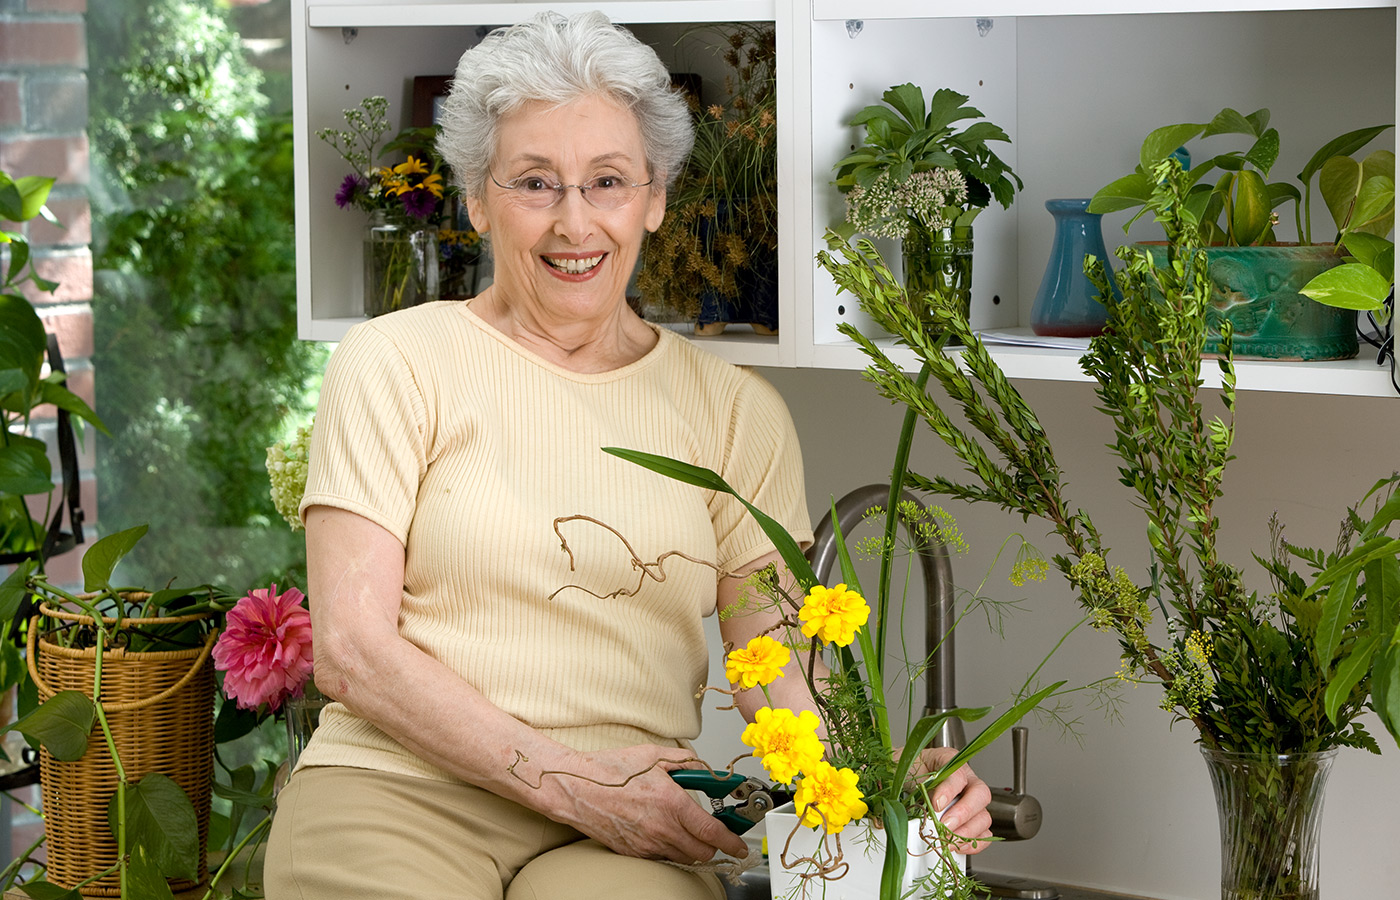 A resident is watering flowers.